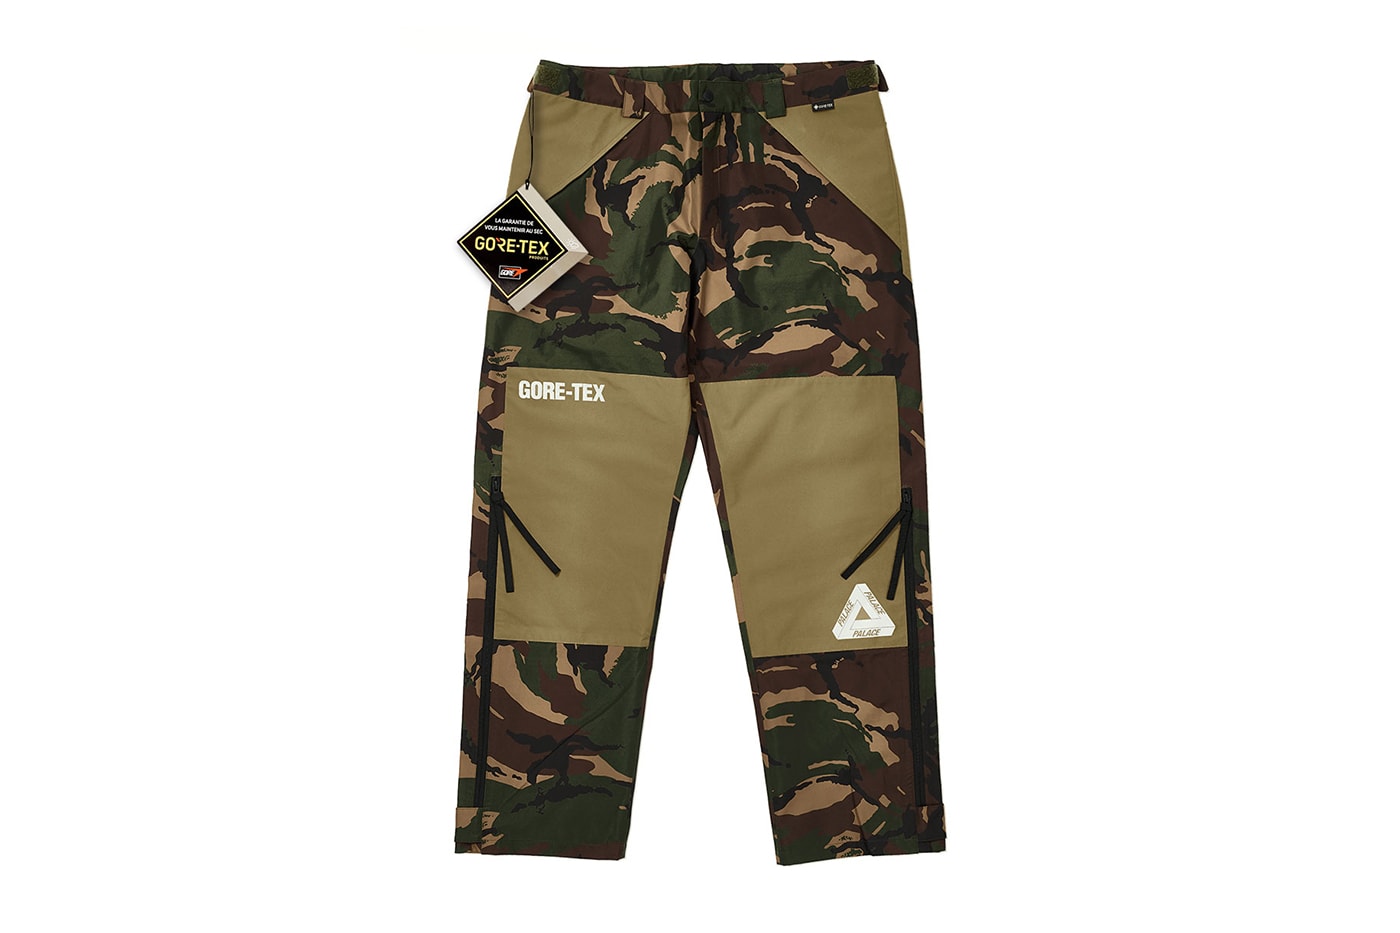 Palace Fall 2020 GORE-TEX Jacket Pants Release Info Date Buy Price Black White Camo